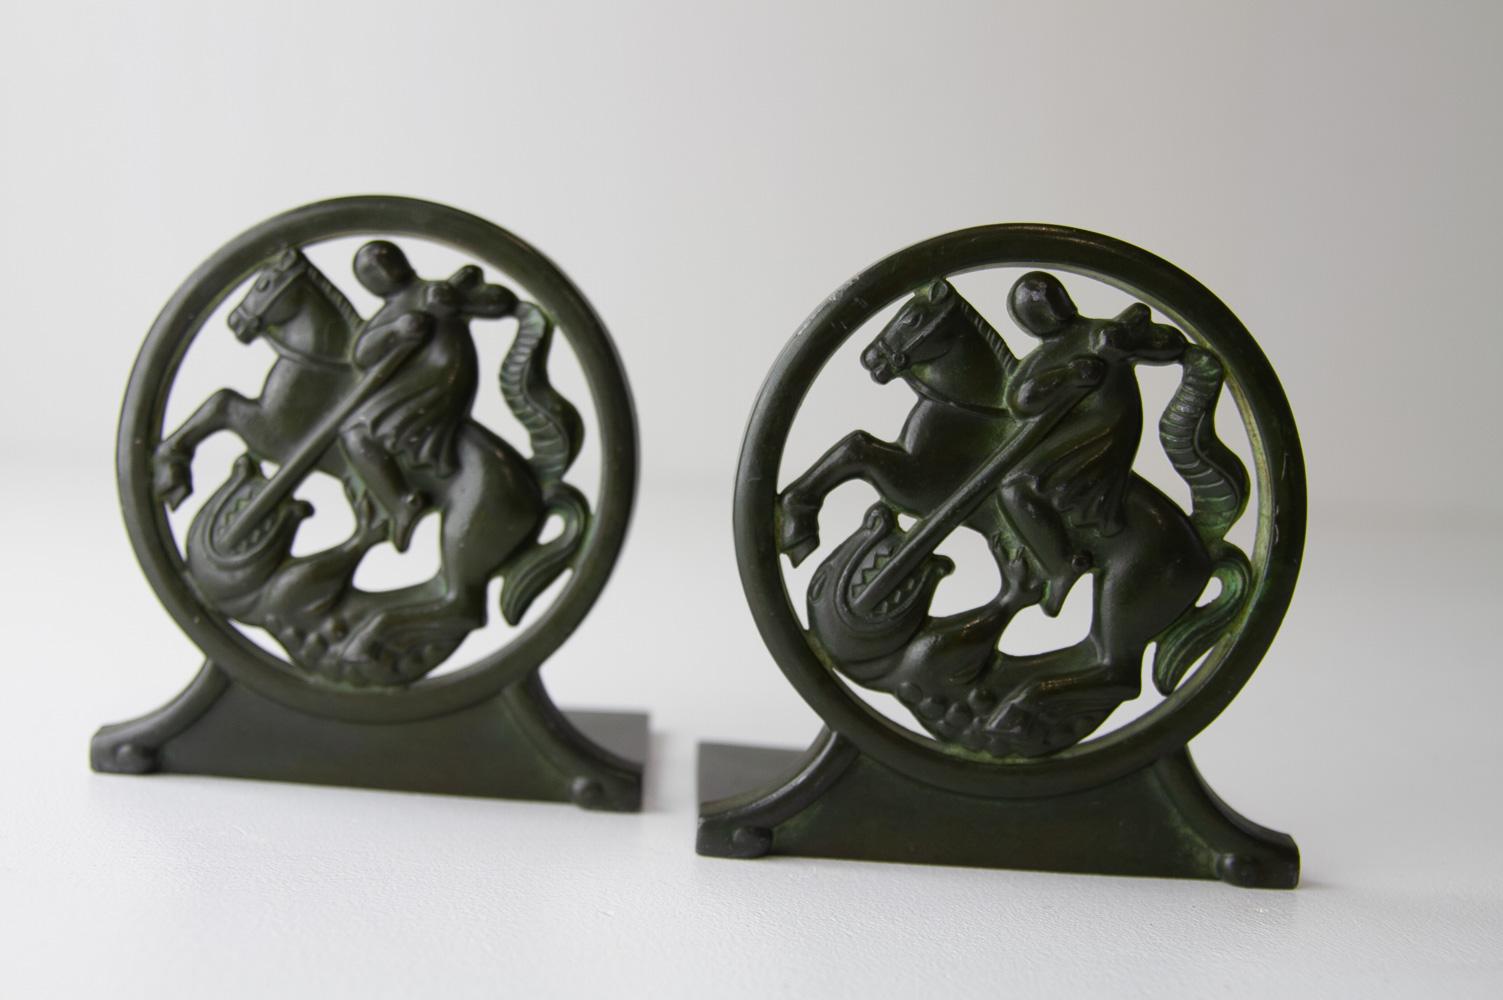 Art Deco Bookends in Disko Metal by Just Andersen, 1930s. Set of 2.
Wonderful pair of book ends designed by Danish sculptor Just Andersen in Denmark in the 1930s. 
Depicting Saint George slaying the dragon. Made of Disko Metal which is an alloy